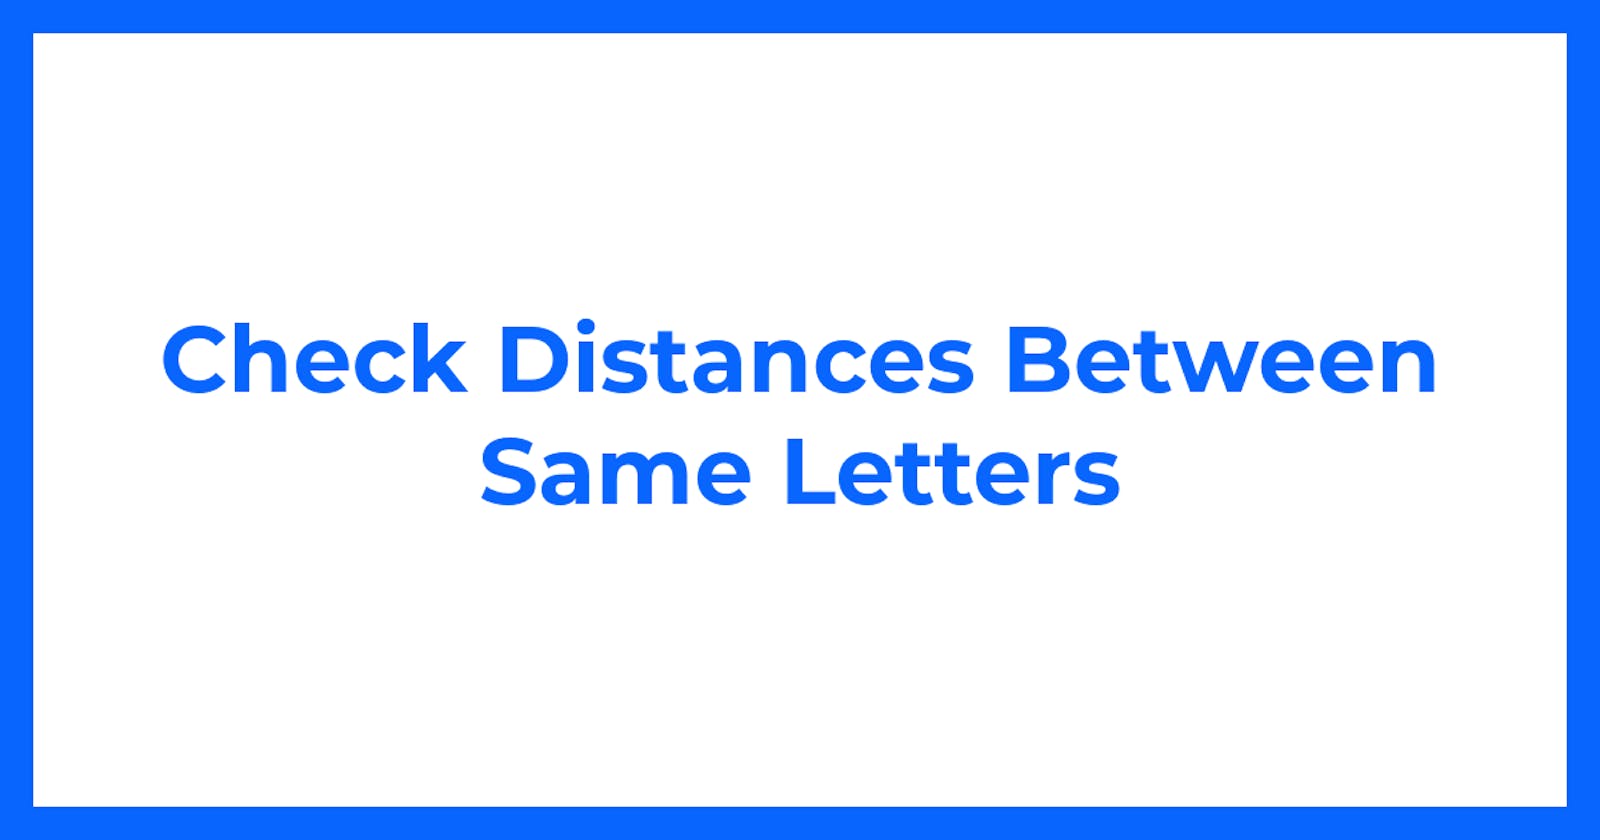 Check Distances Between Same Letters